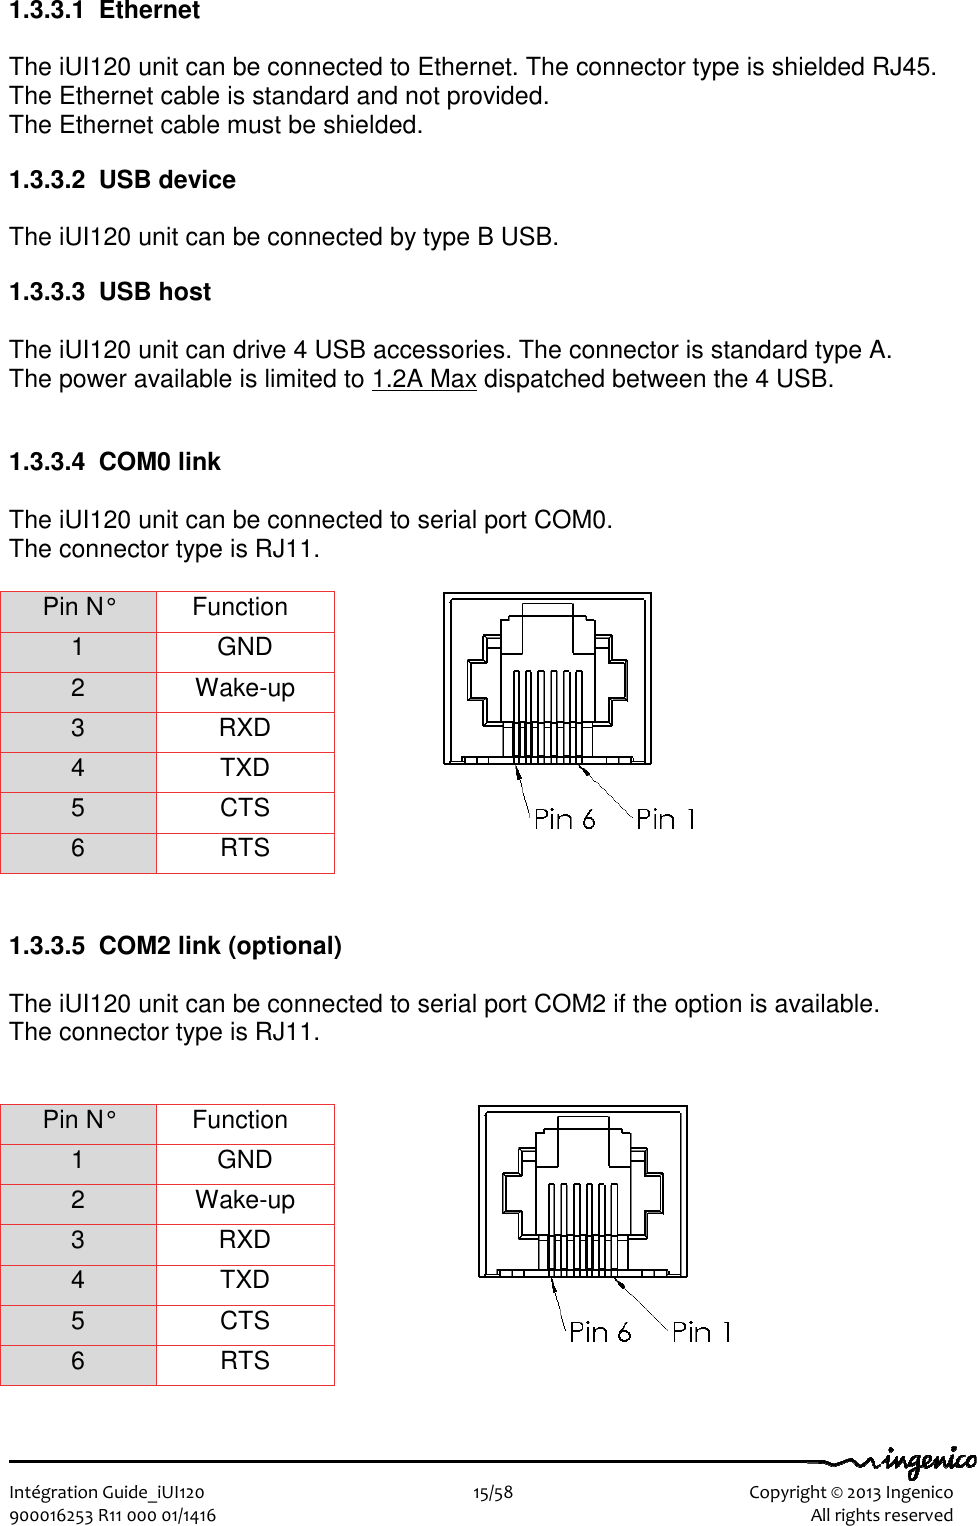   Intégration Guide_iUI120                        15/58    Copyright © 2013 Ingenico 900016253 R11 000 01/1416    All rights reserved 1.3.3.1  Ethernet   The iUI120 unit can be connected to Ethernet. The connector type is shielded RJ45. The Ethernet cable is standard and not provided. The Ethernet cable must be shielded.  1.3.3.2  USB device  The iUI120 unit can be connected by type B USB.  1.3.3.3  USB host  The iUI120 unit can drive 4 USB accessories. The connector is standard type A. The power available is limited to 1.2A Max dispatched between the 4 USB.    1.3.3.4  COM0 link  The iUI120 unit can be connected to serial port COM0.  The connector type is RJ11.  Pin N°  Function 1  GND 2  Wake-up 3  RXD 4  TXD 5  CTS 6  RTS   1.3.3.5  COM2 link (optional)  The iUI120 unit can be connected to serial port COM2 if the option is available.  The connector type is RJ11.   Pin N°  Function 1  GND 2  Wake-up 3  RXD 4  TXD 5  CTS 6  RTS  